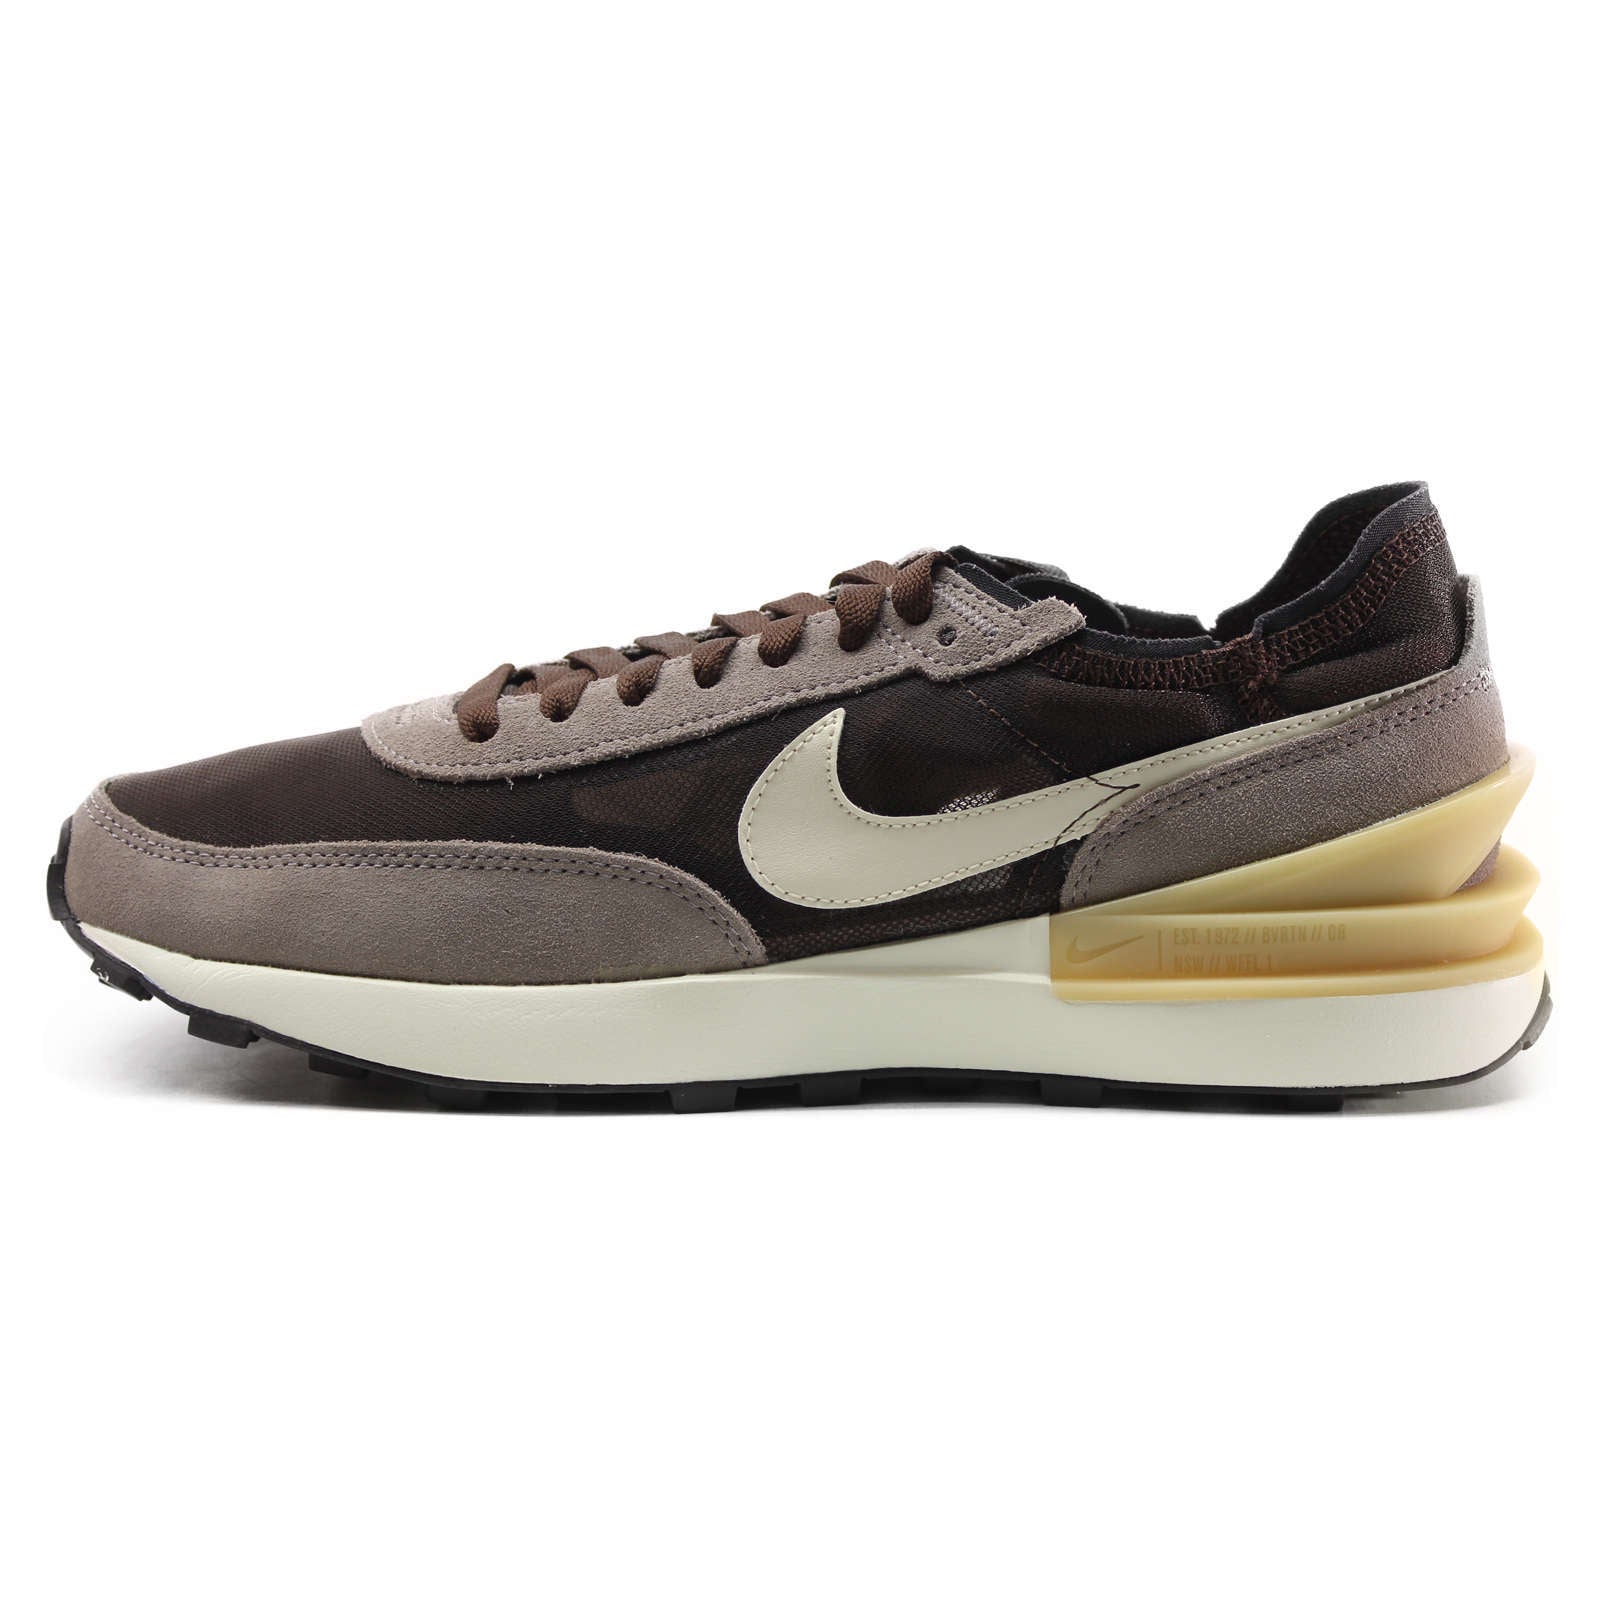 Nike Waffle One Leather Textile Men's Low-Top Sneakers#color_light chocolate natural